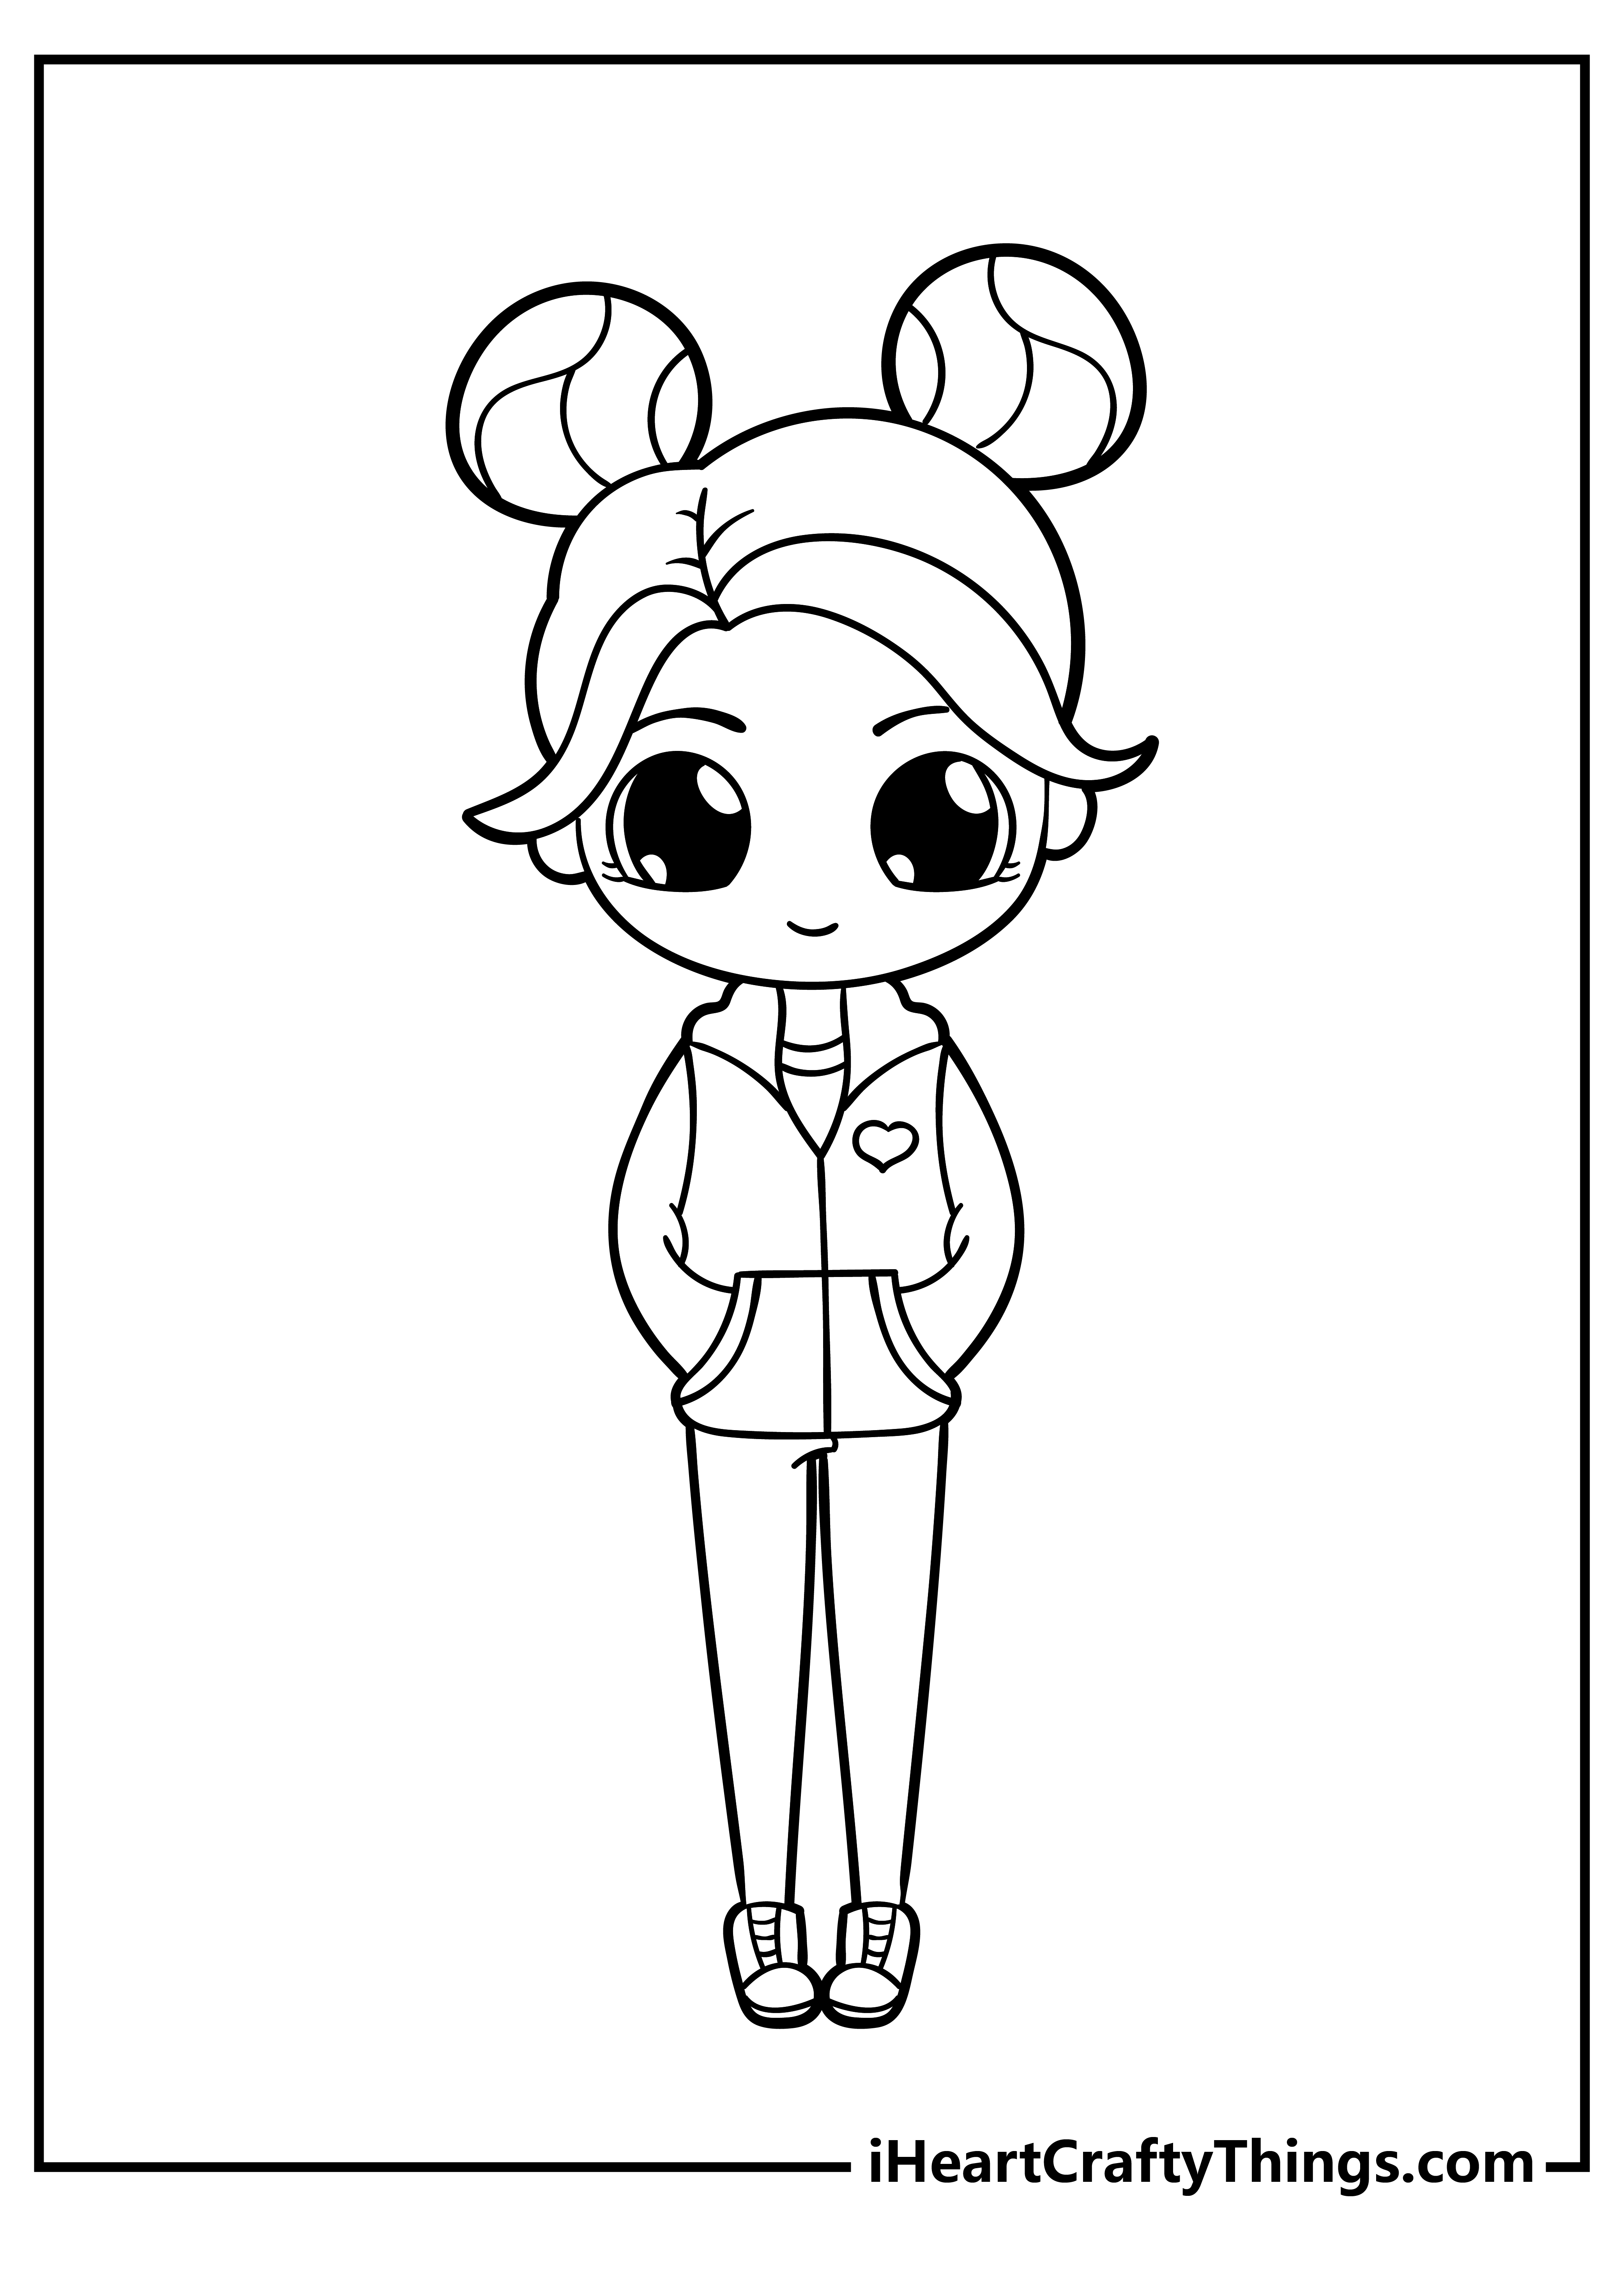 Printable Cute Coloring Pages For Girls Updated 14